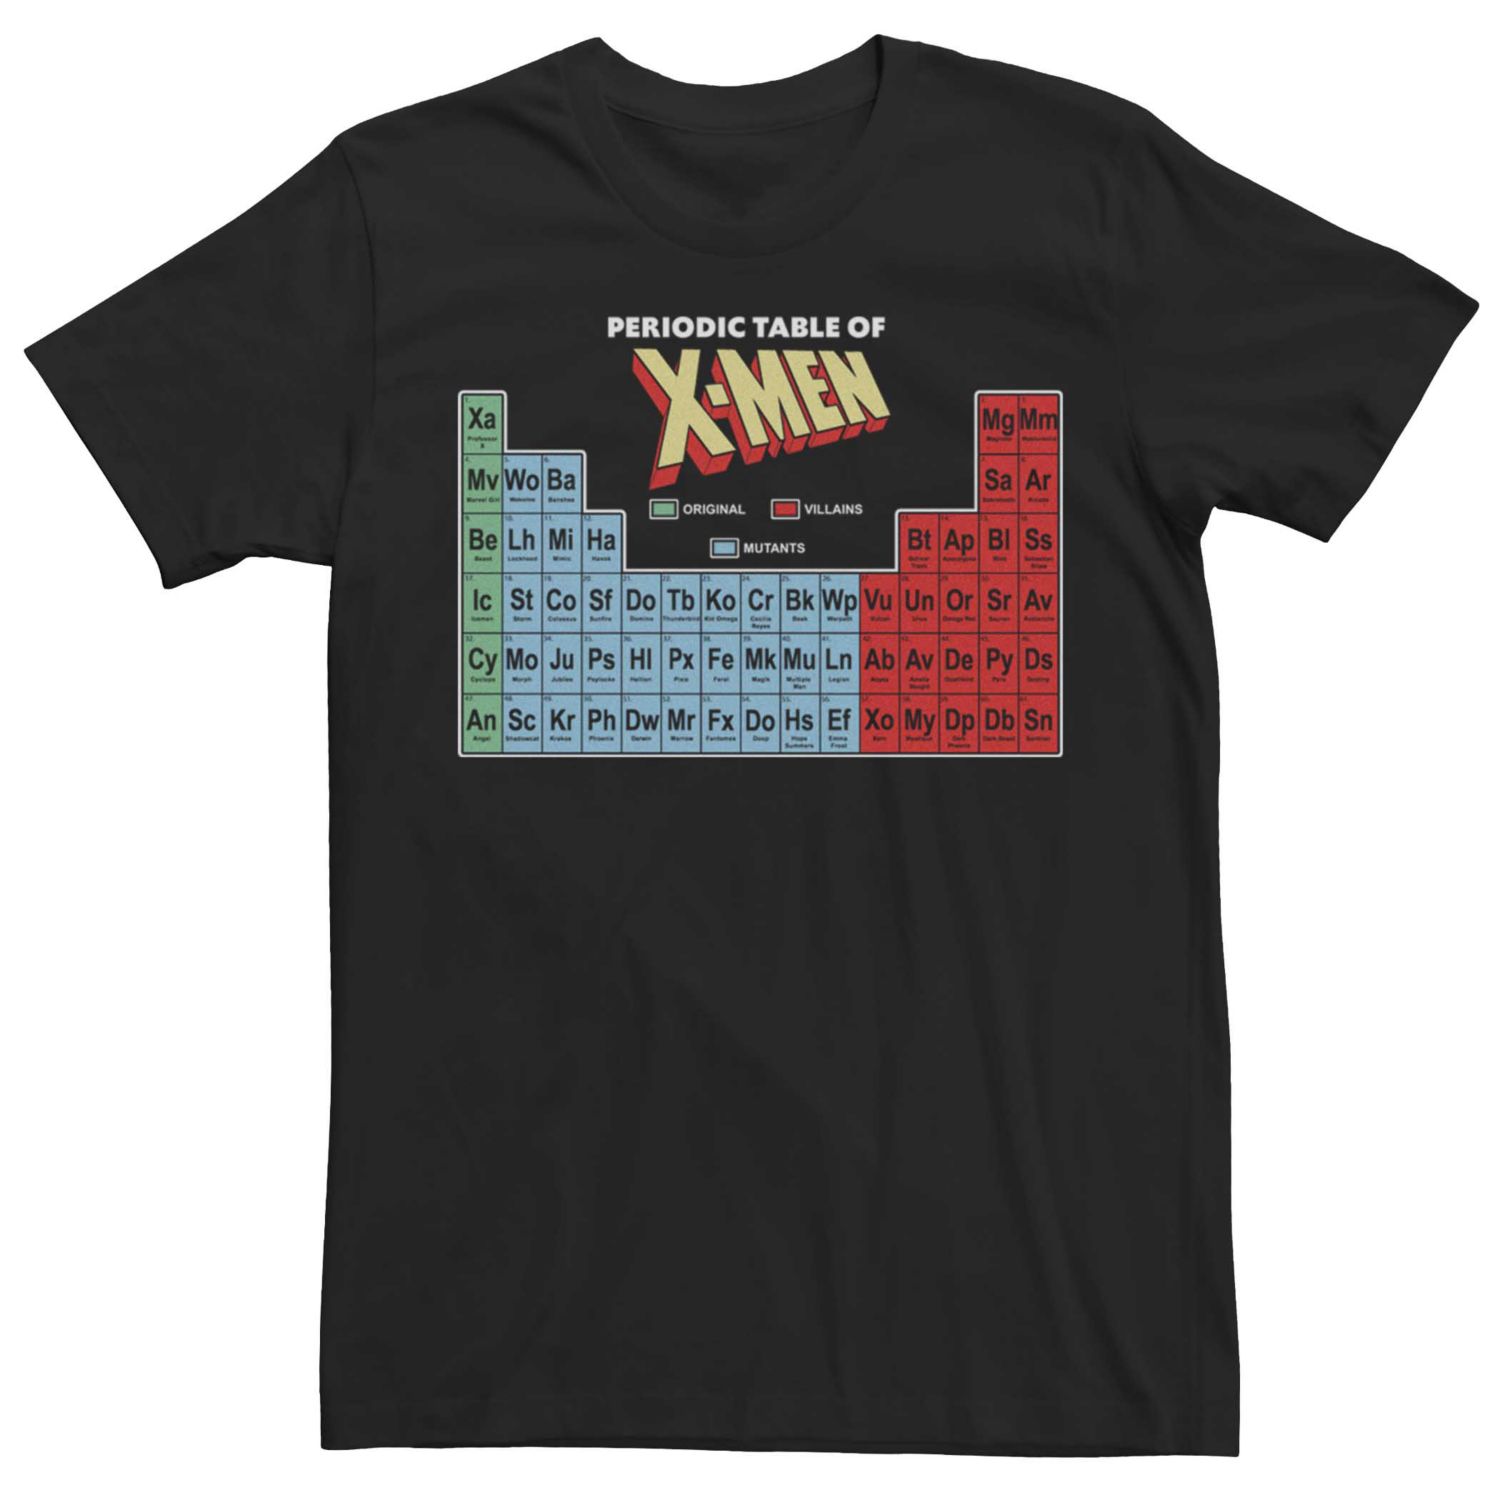 By 2021 at the latest Men's Marvel Periodic Table Of XMen